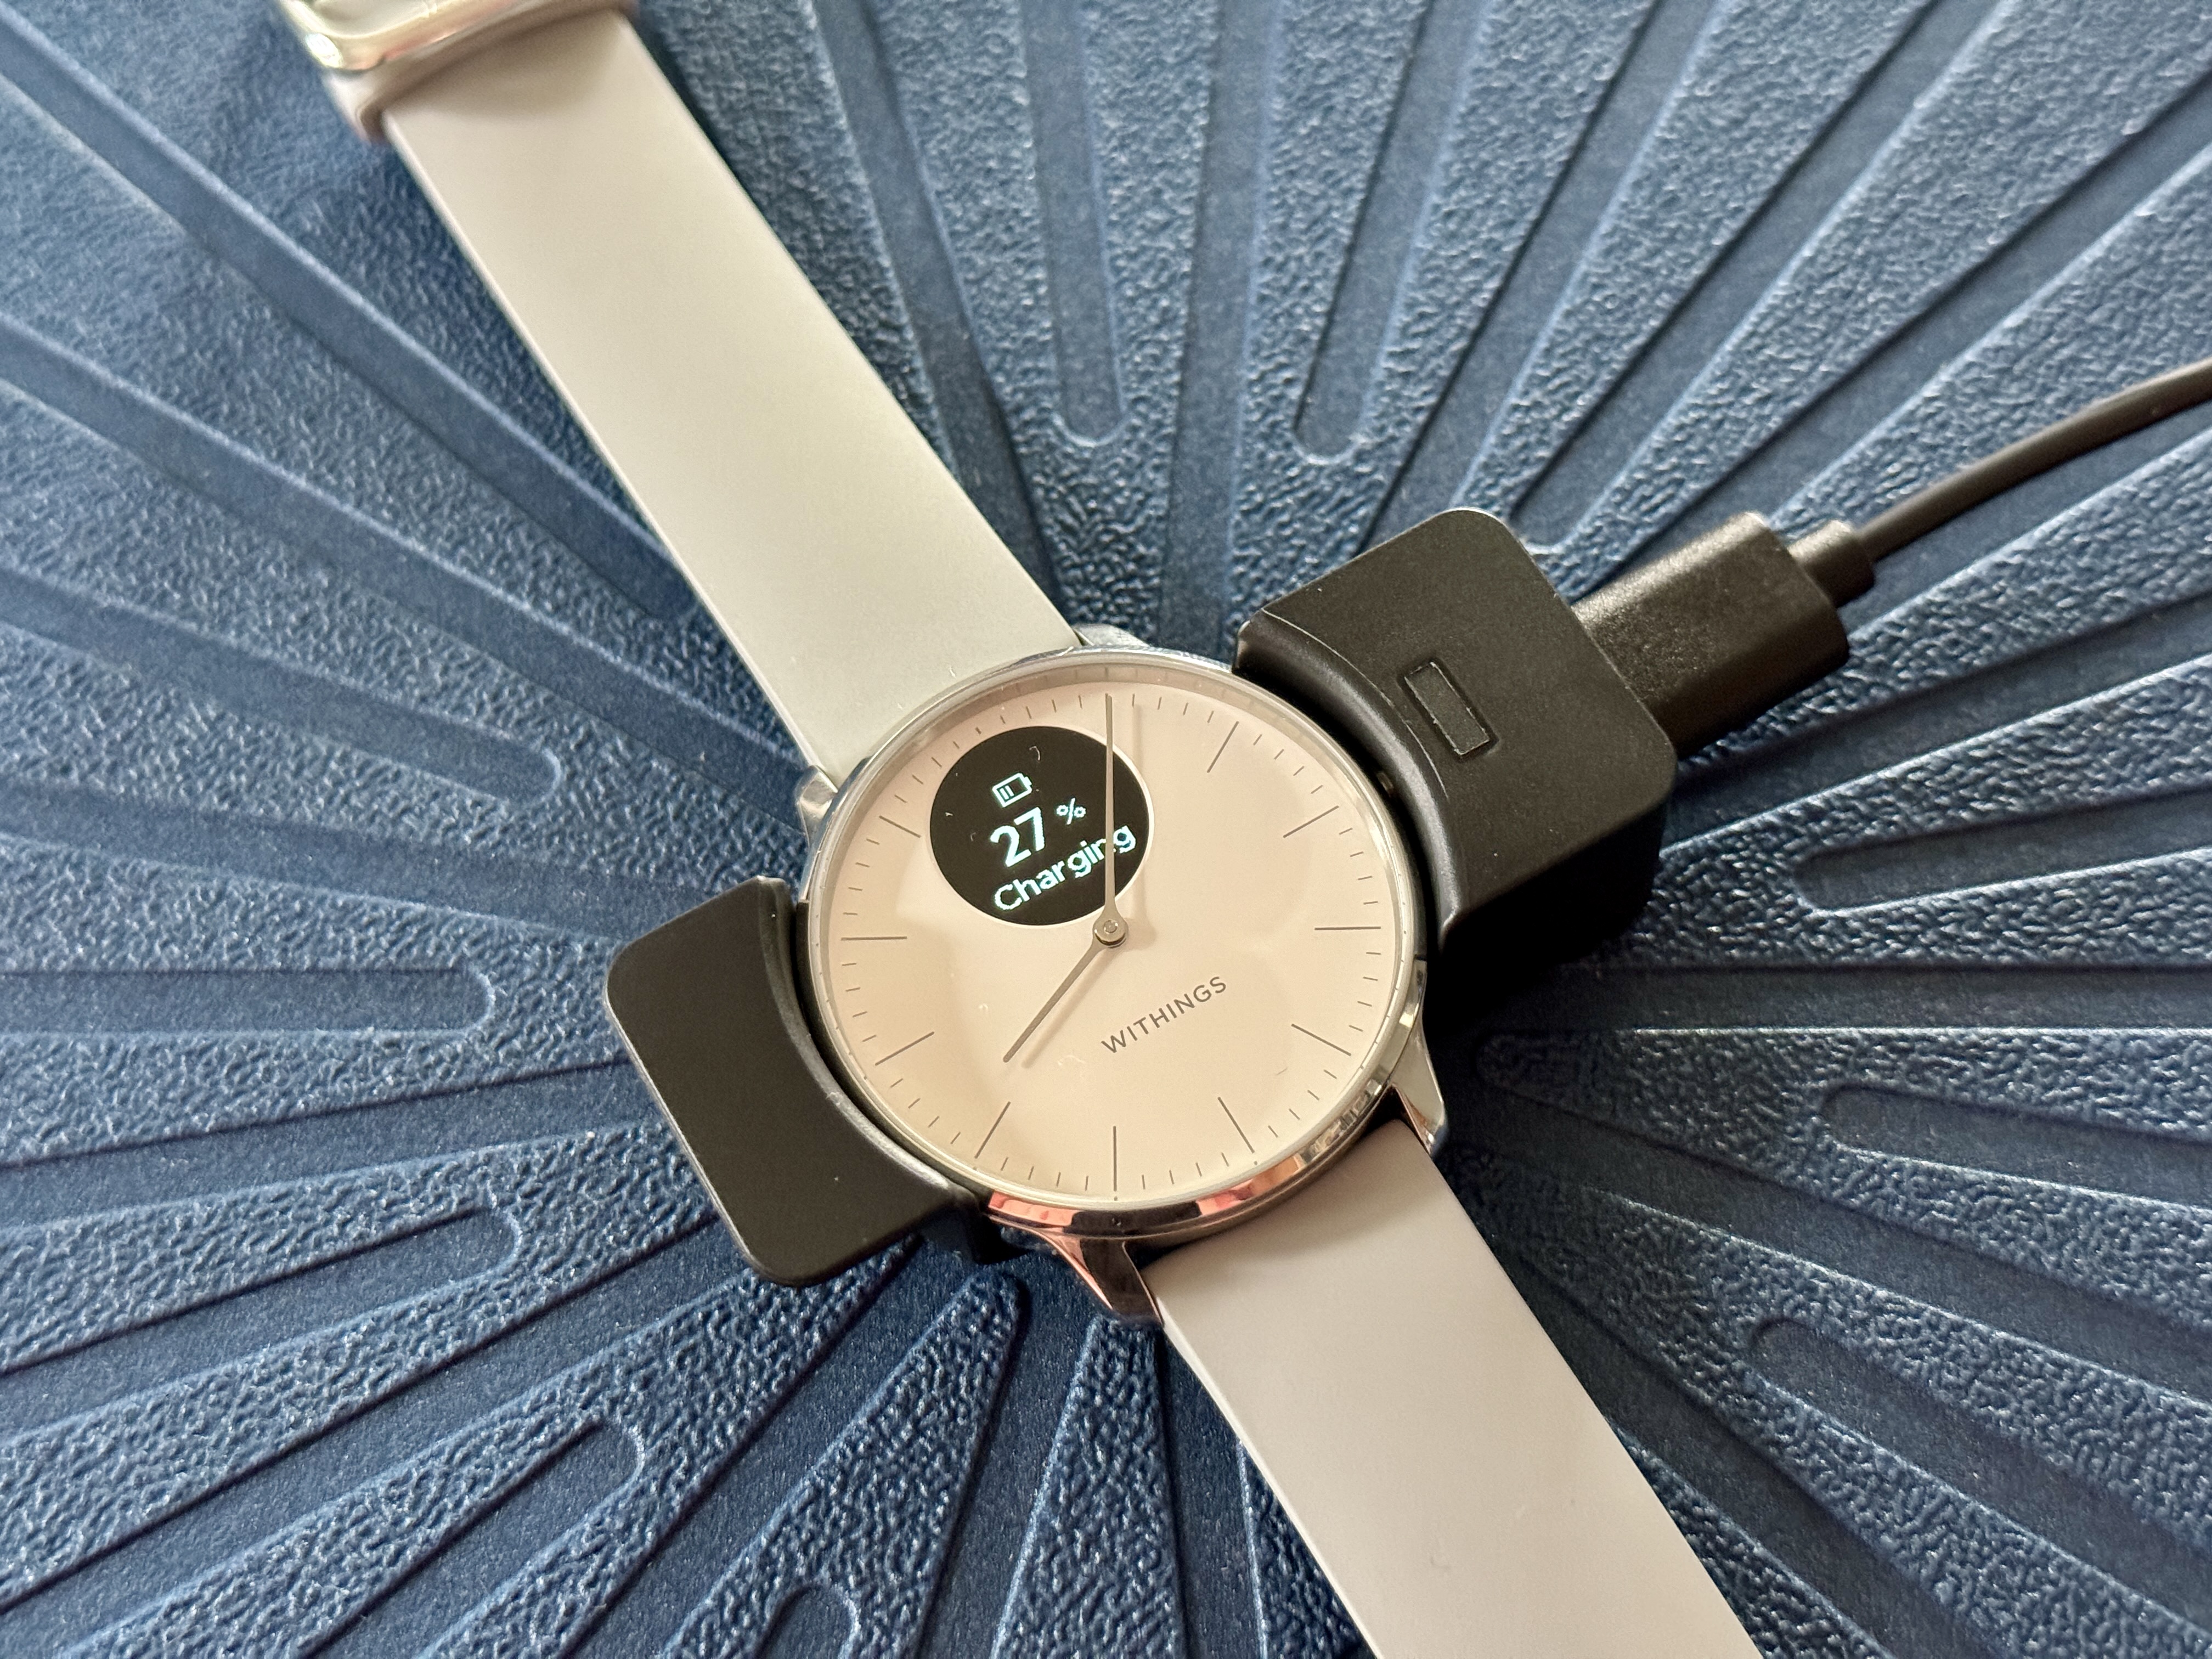 Body Scan - Charging the battery – Withings